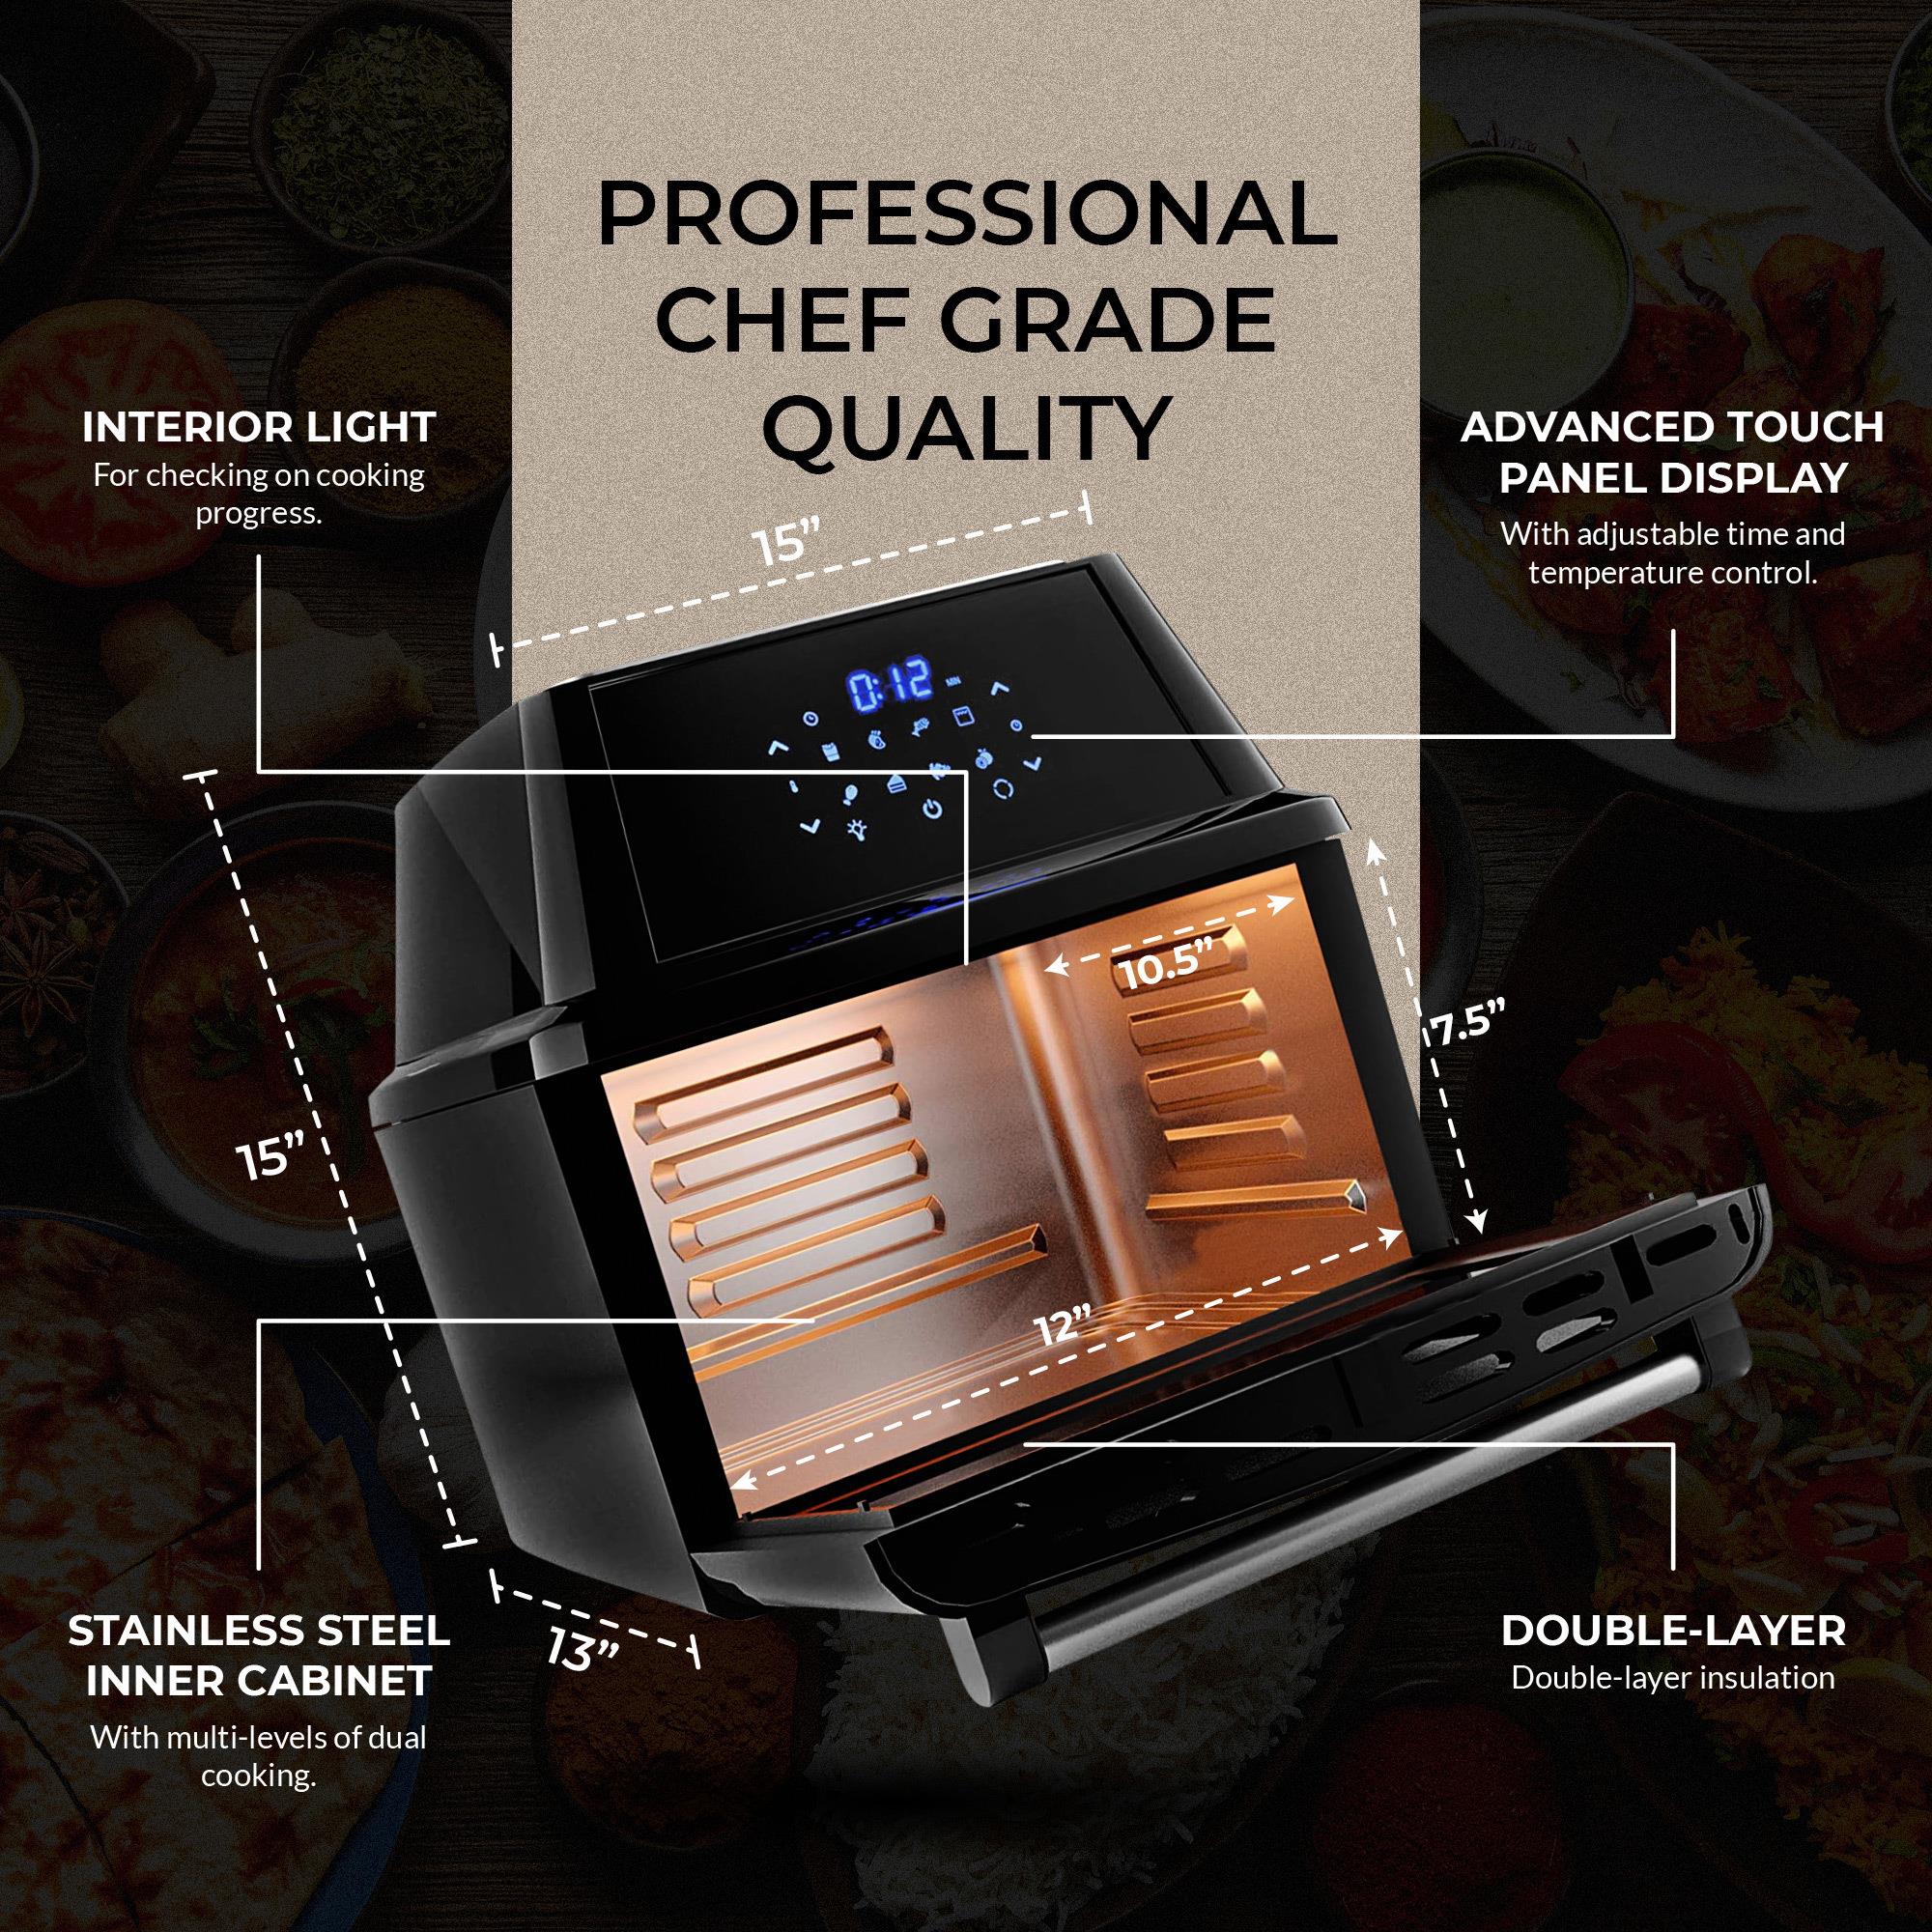 ChefWave Magma 16 qt. Multifunctional Air Fryer Oven with Rotisserie, Dehydrator and Accessories - image 2 of 13